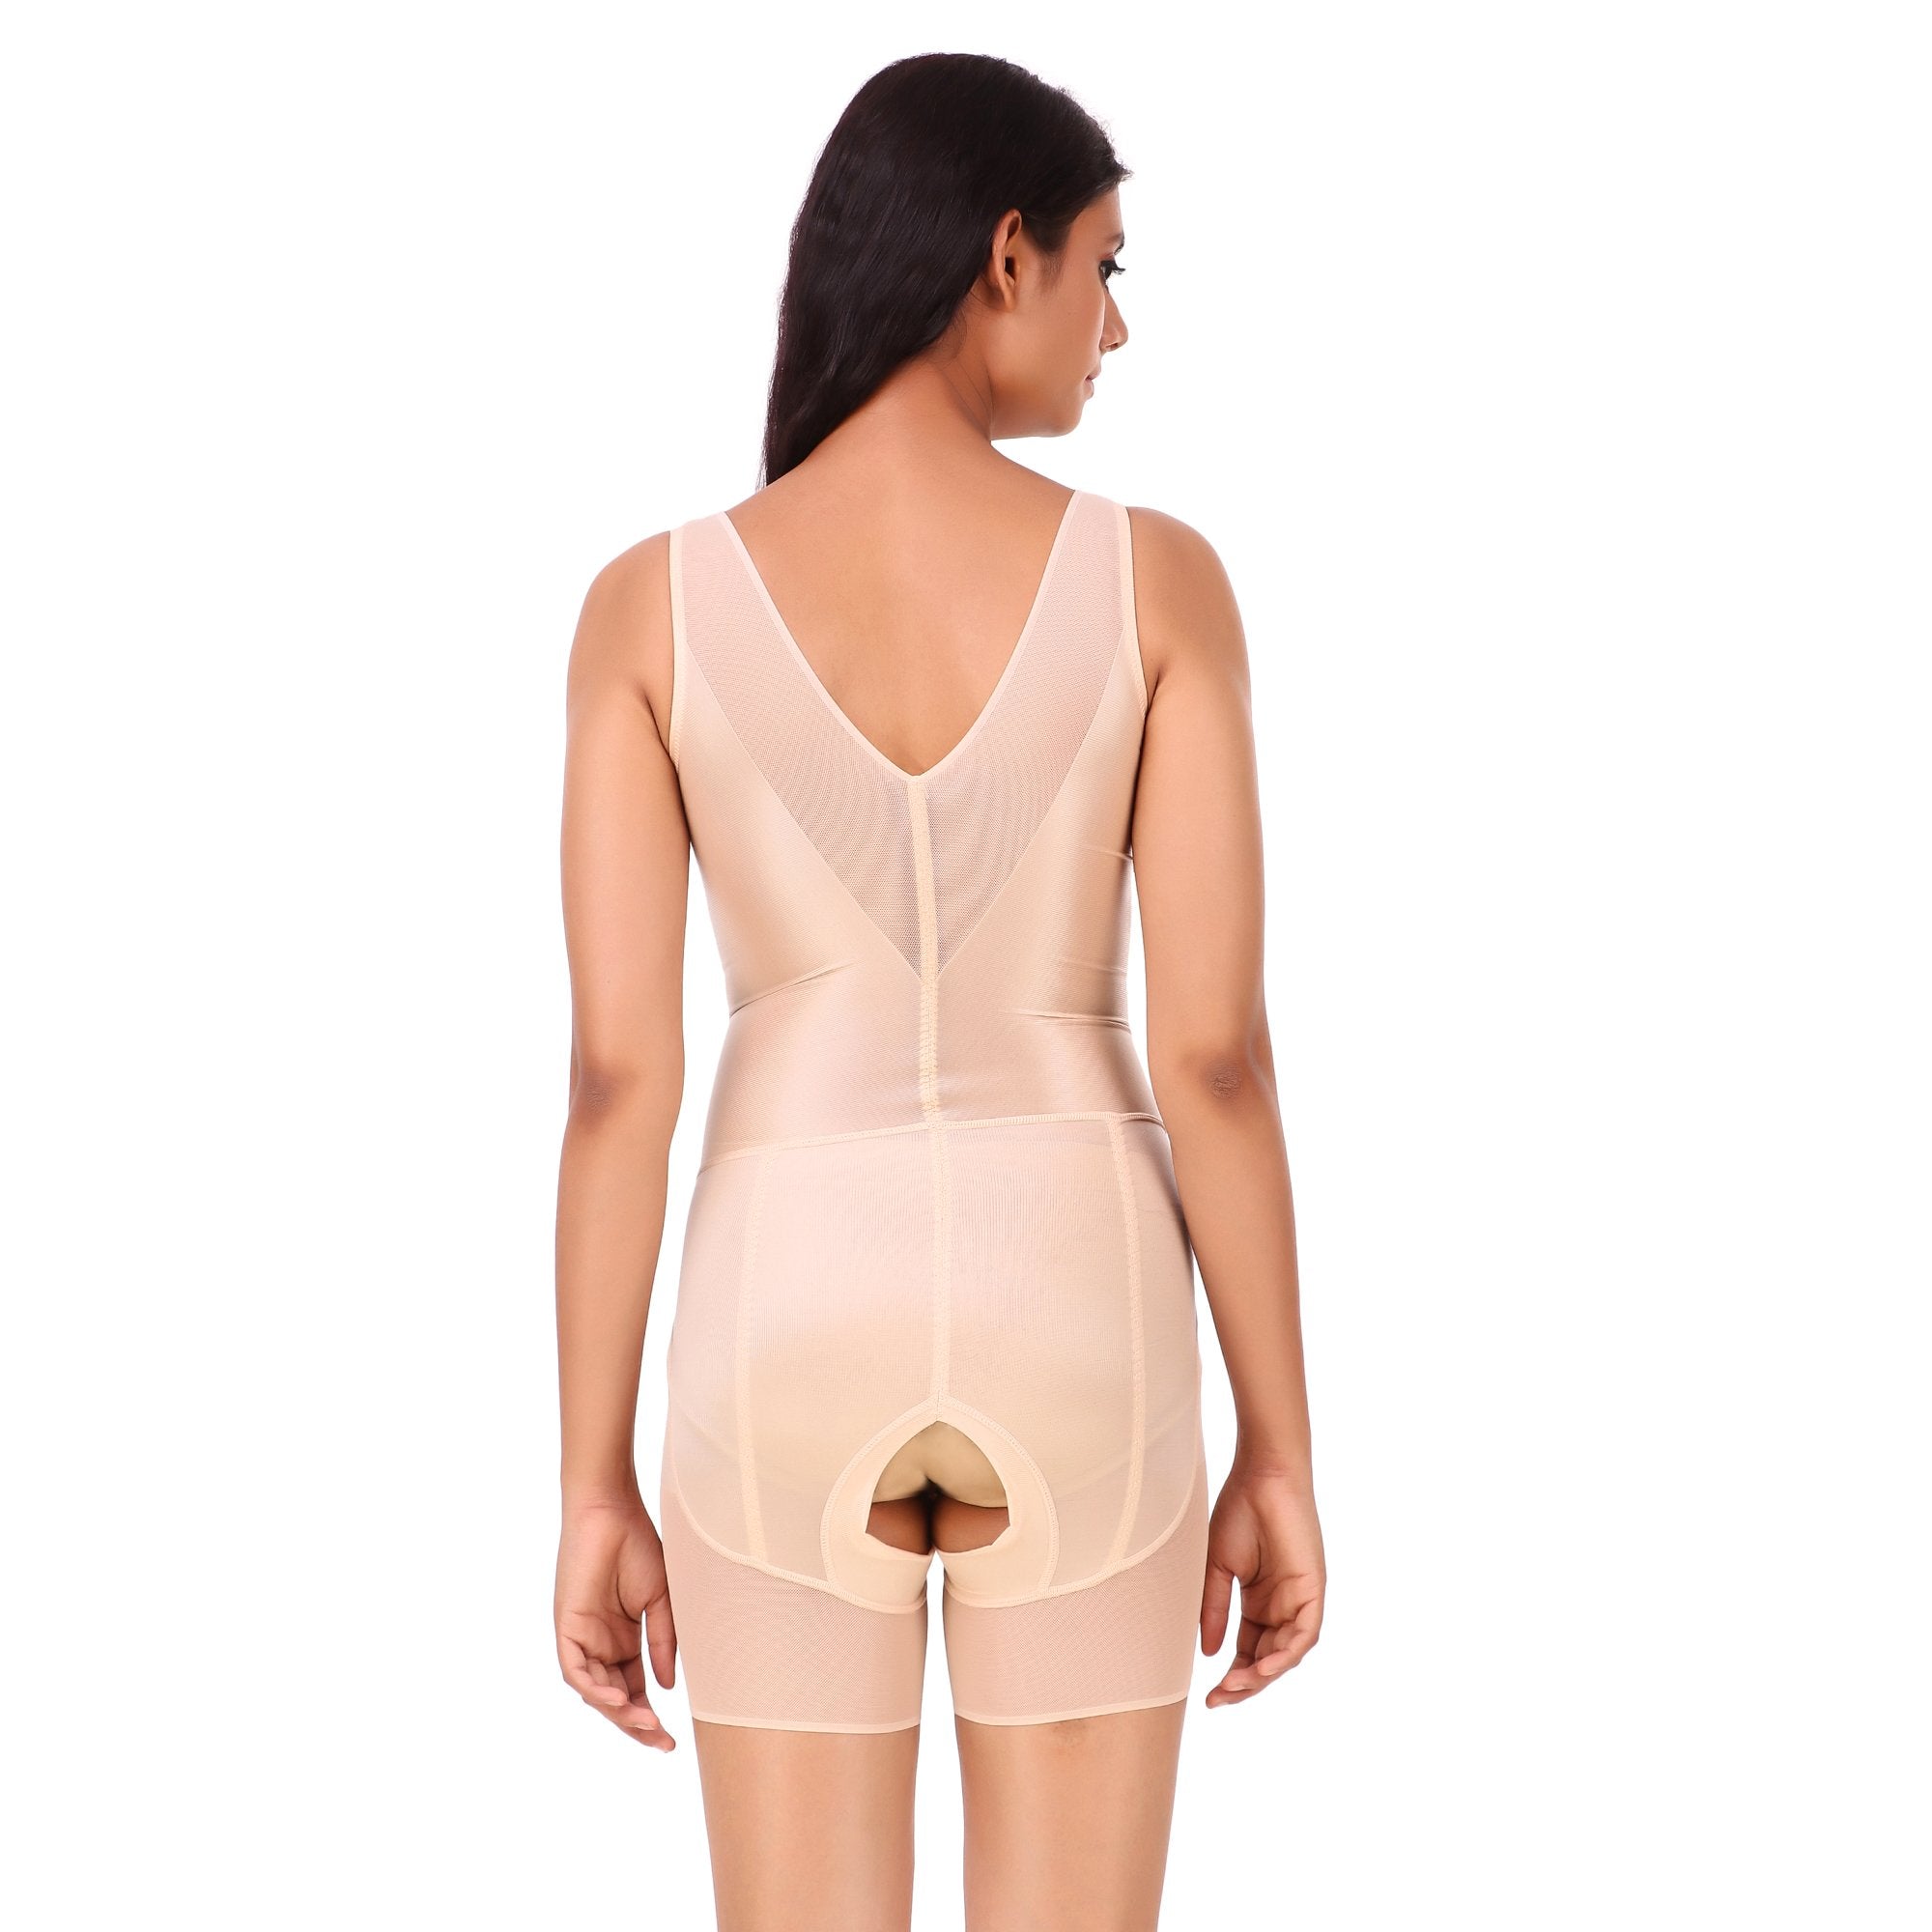 AXTZH-XCORSET3321 Laser-Cut No-Panty Lines High Compression Body Suit